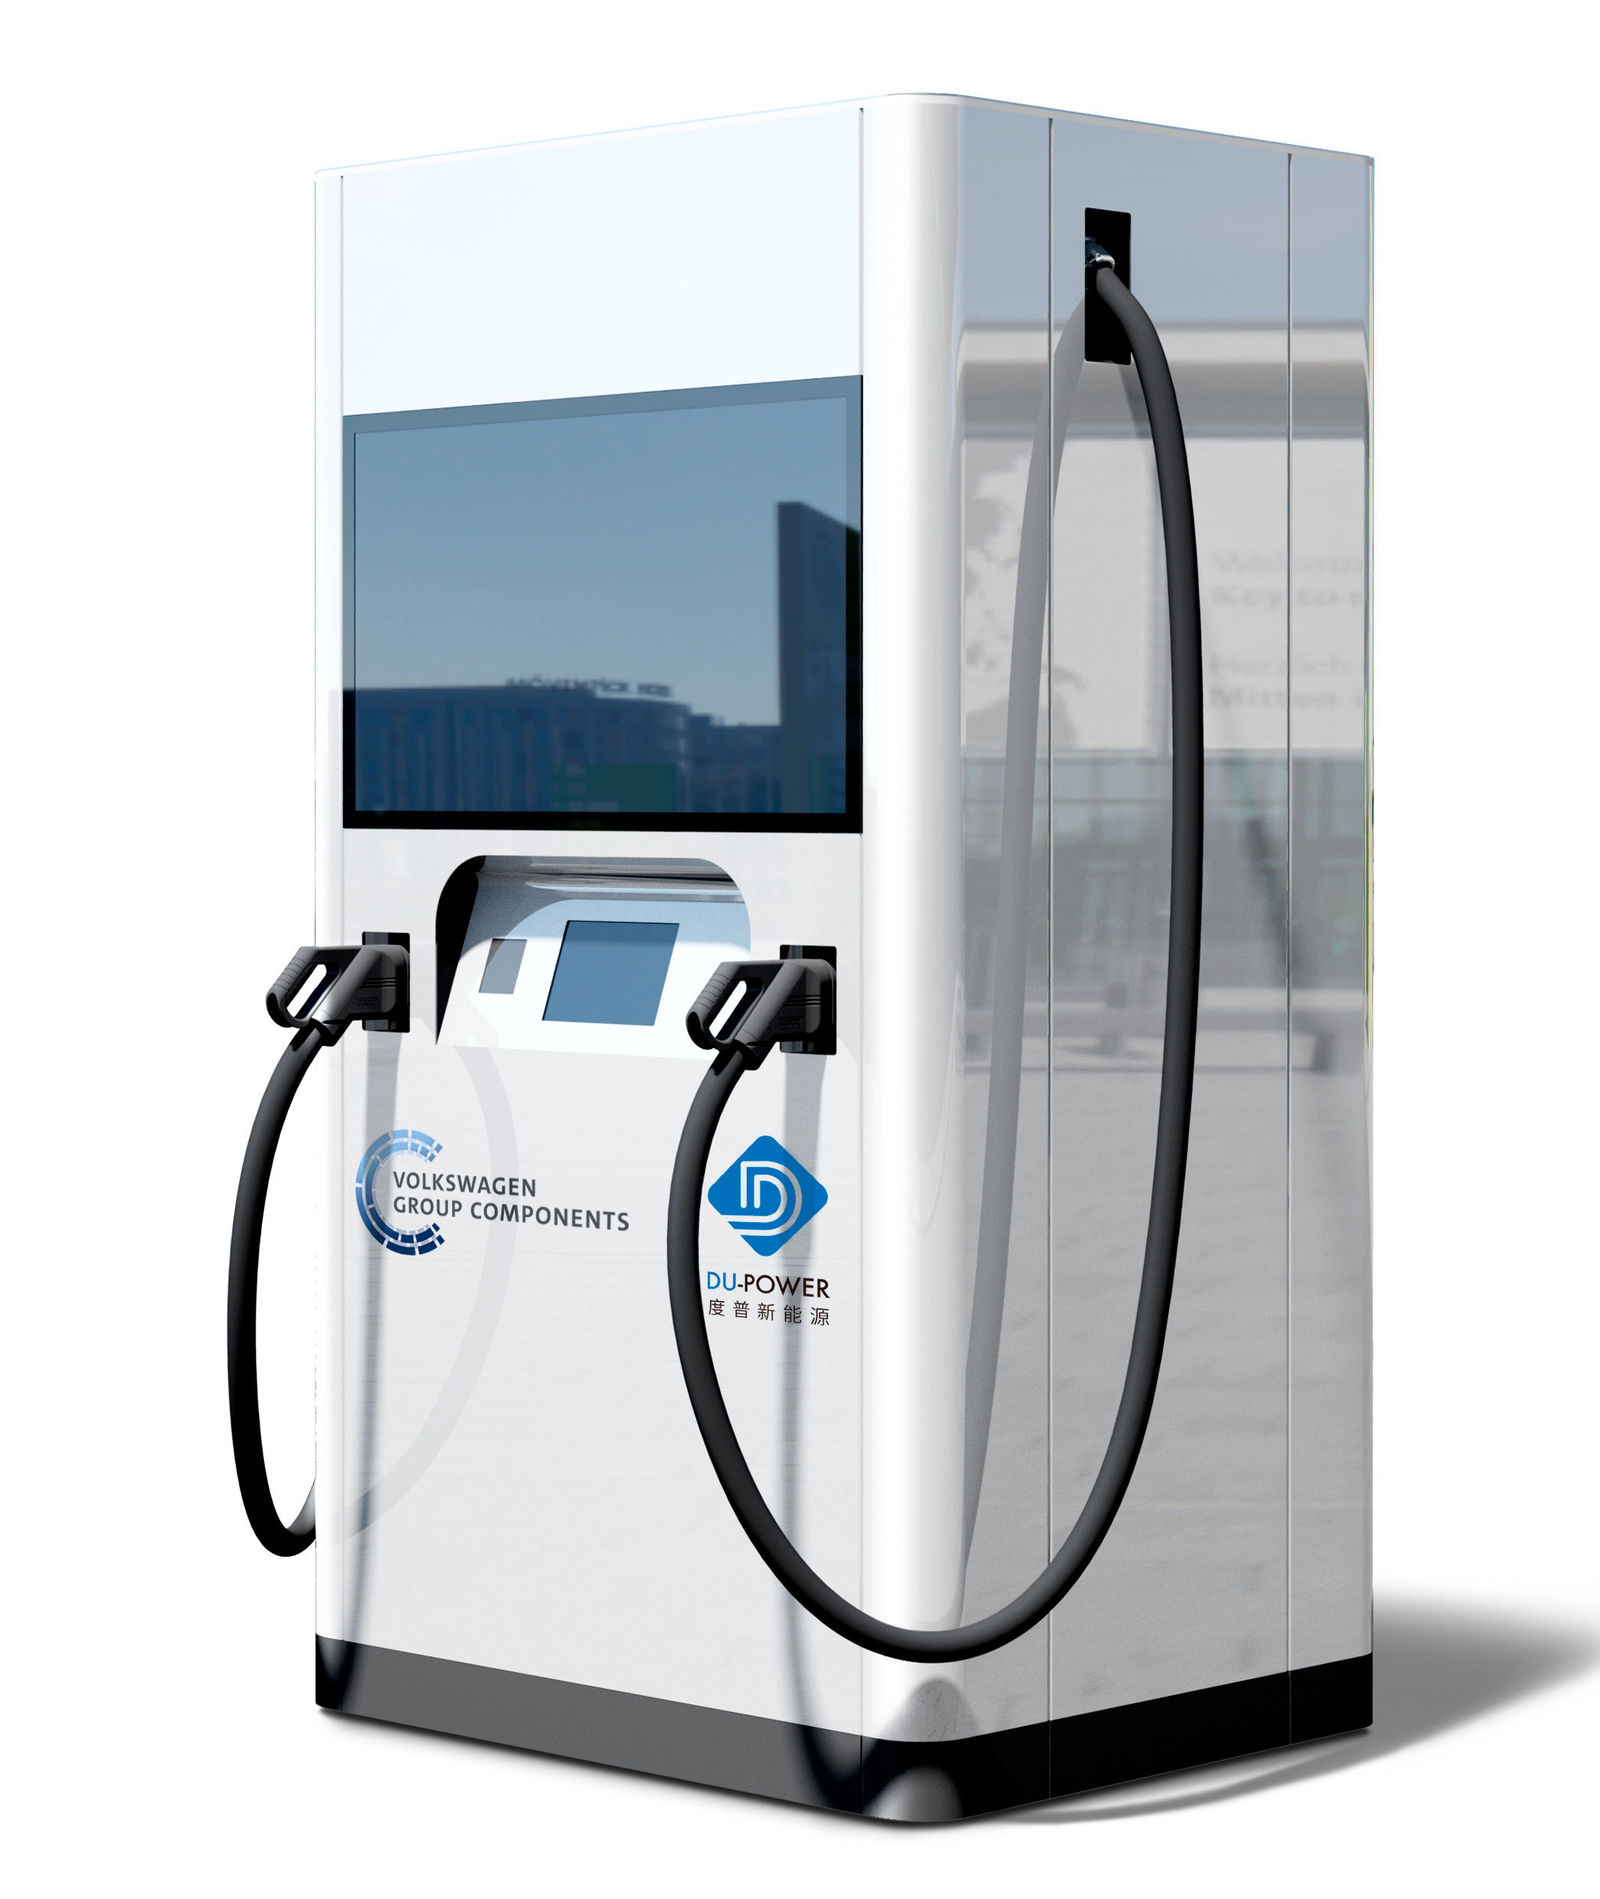 Flexible quick charging stations launch in China